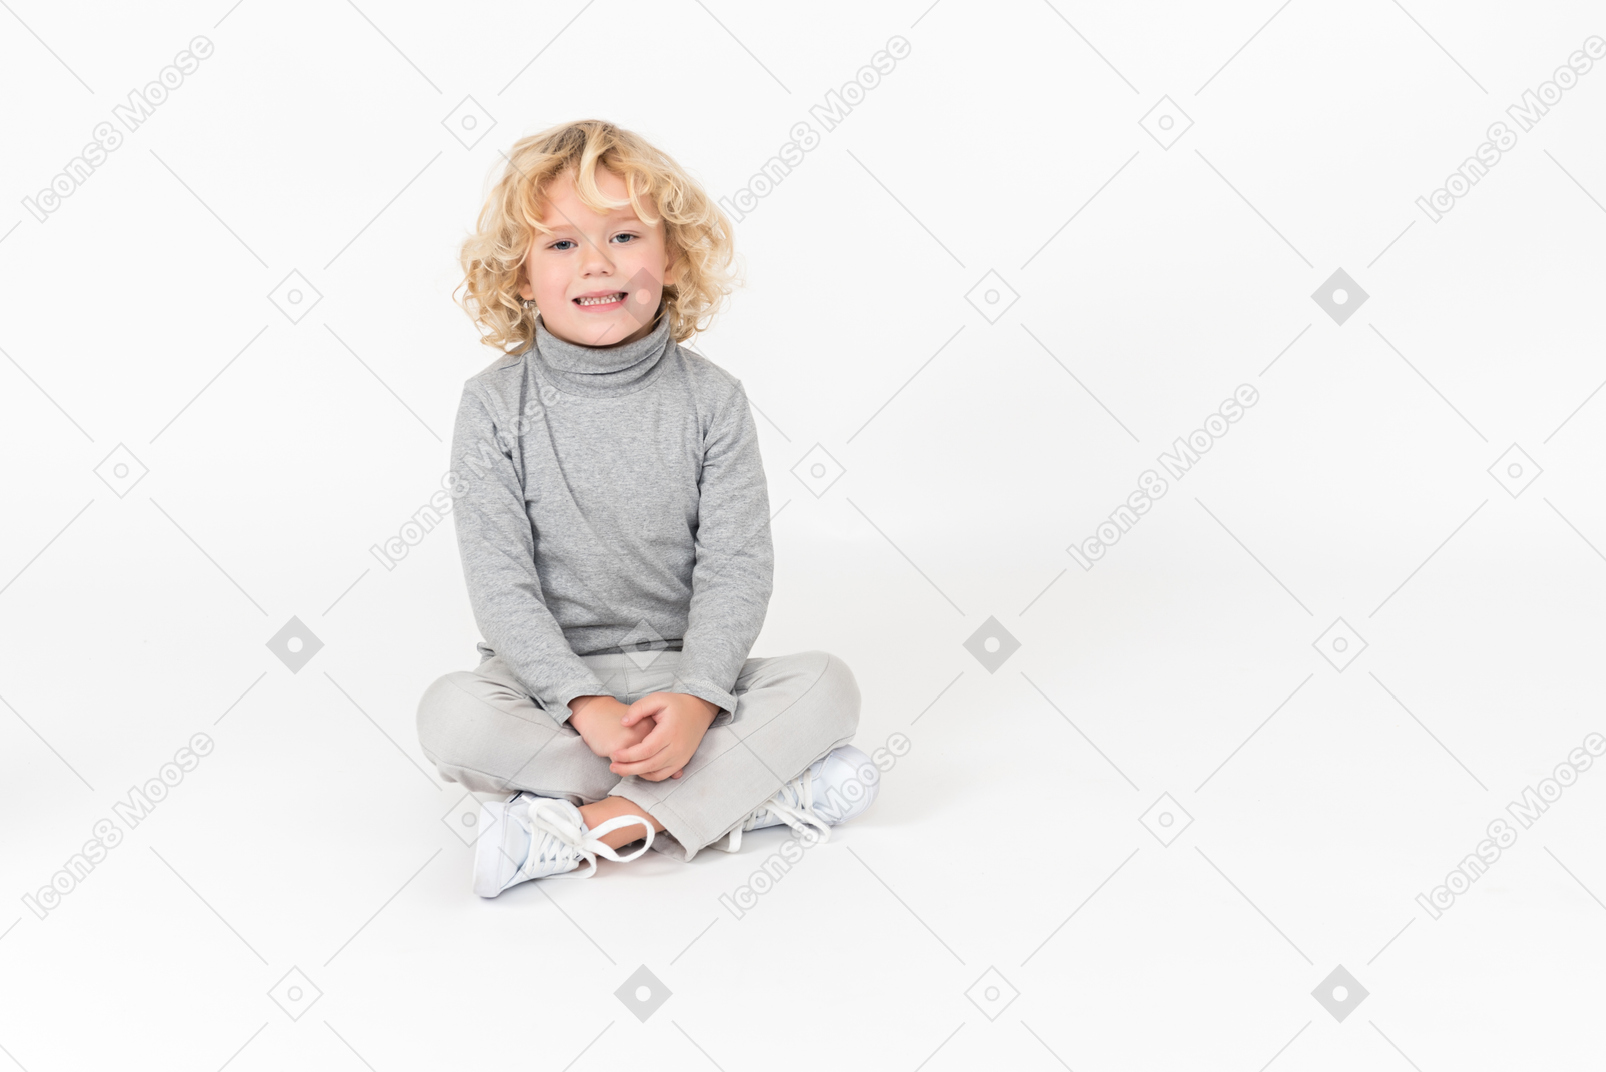 Cute kid boy smiling and sitting on the floor